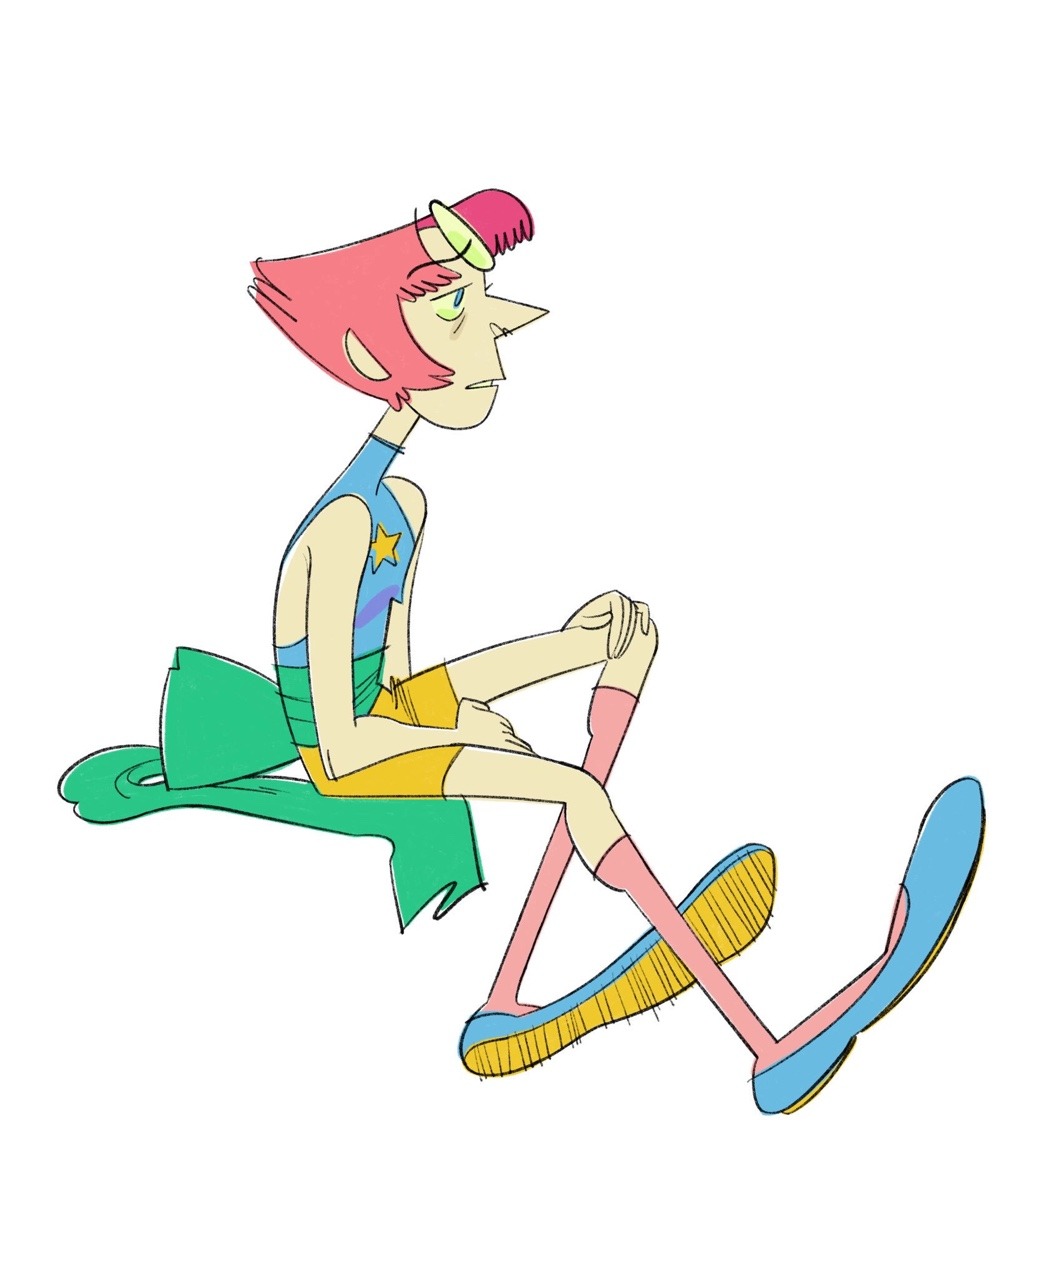 still thinking about Pearl